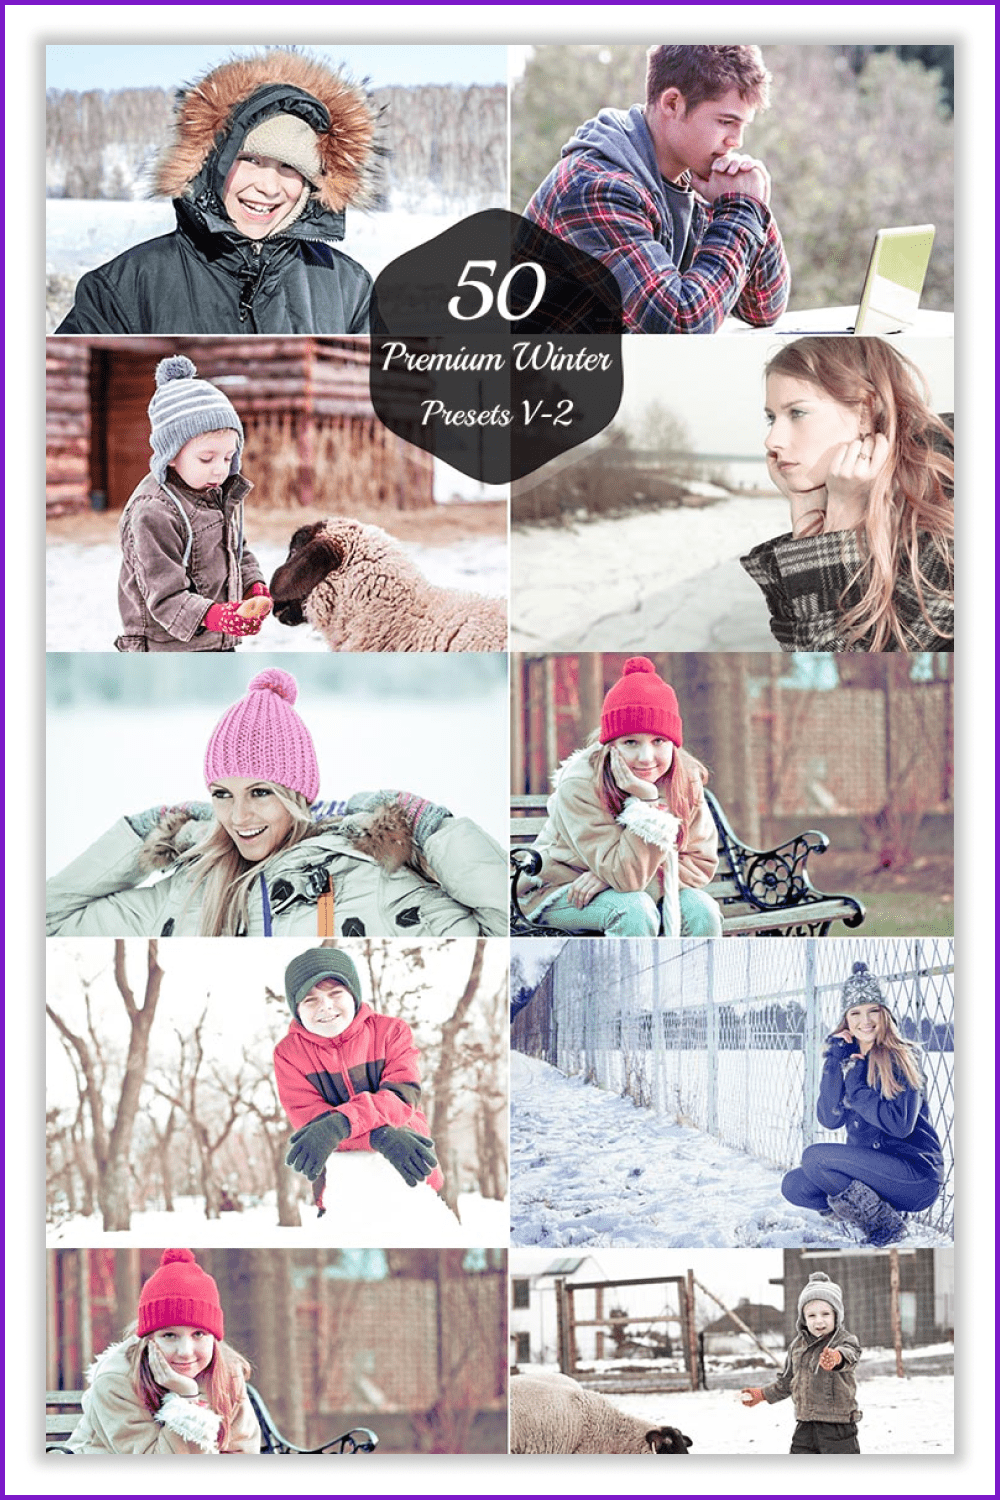 Photos of people in winter landscapes.